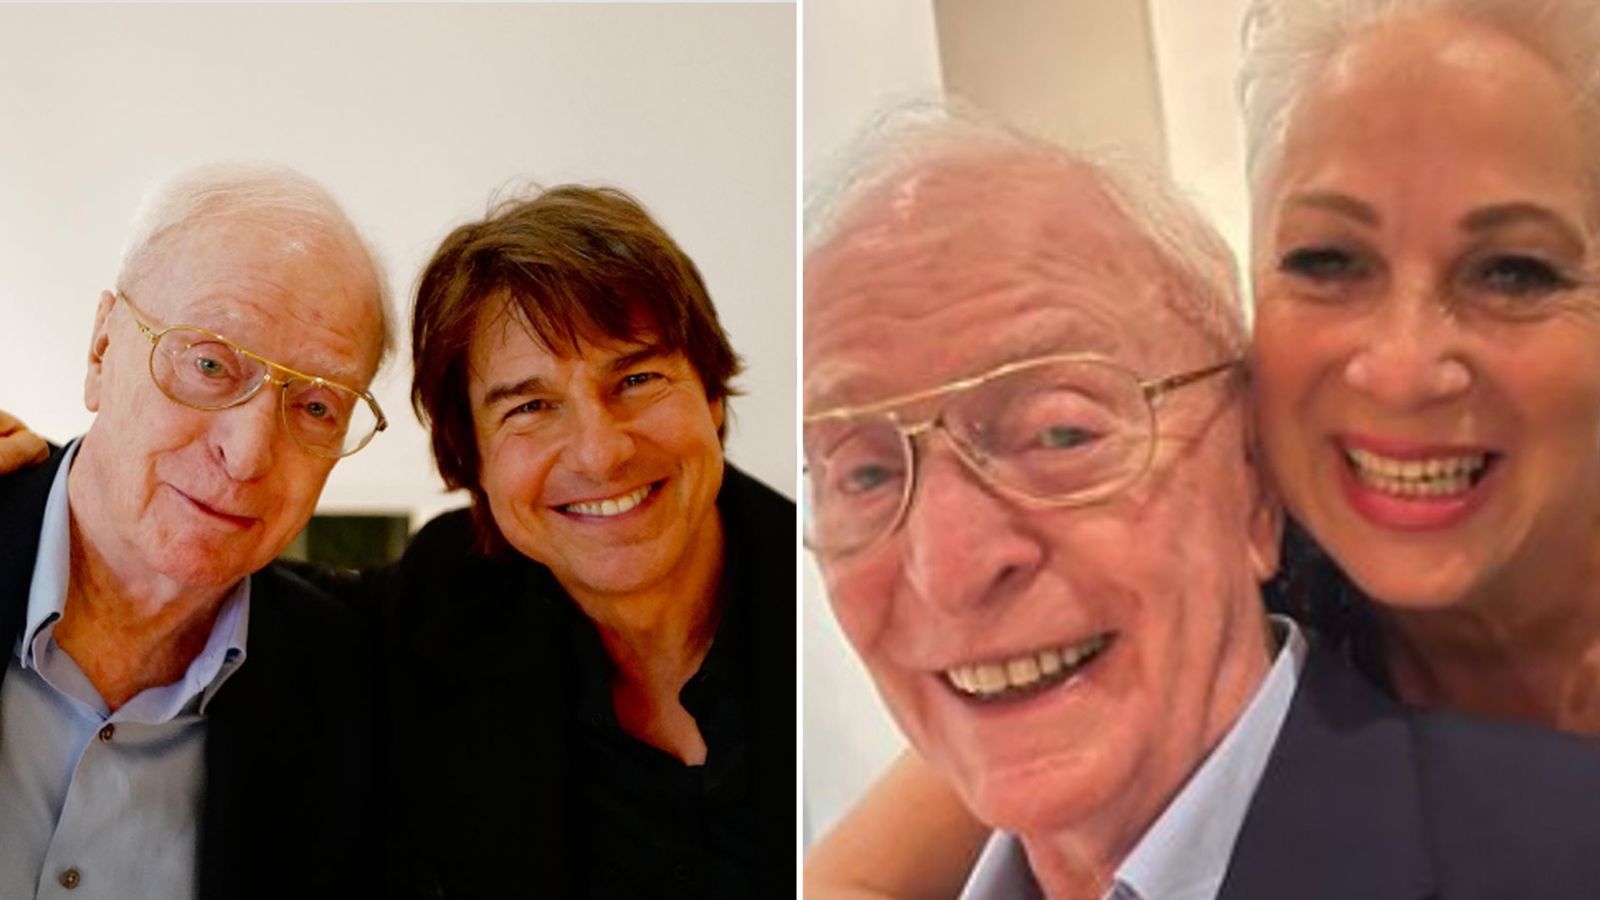 Sir Michael Caine celebrates 90th birthday with Tom Cruise and Loose Women's Denise Welch